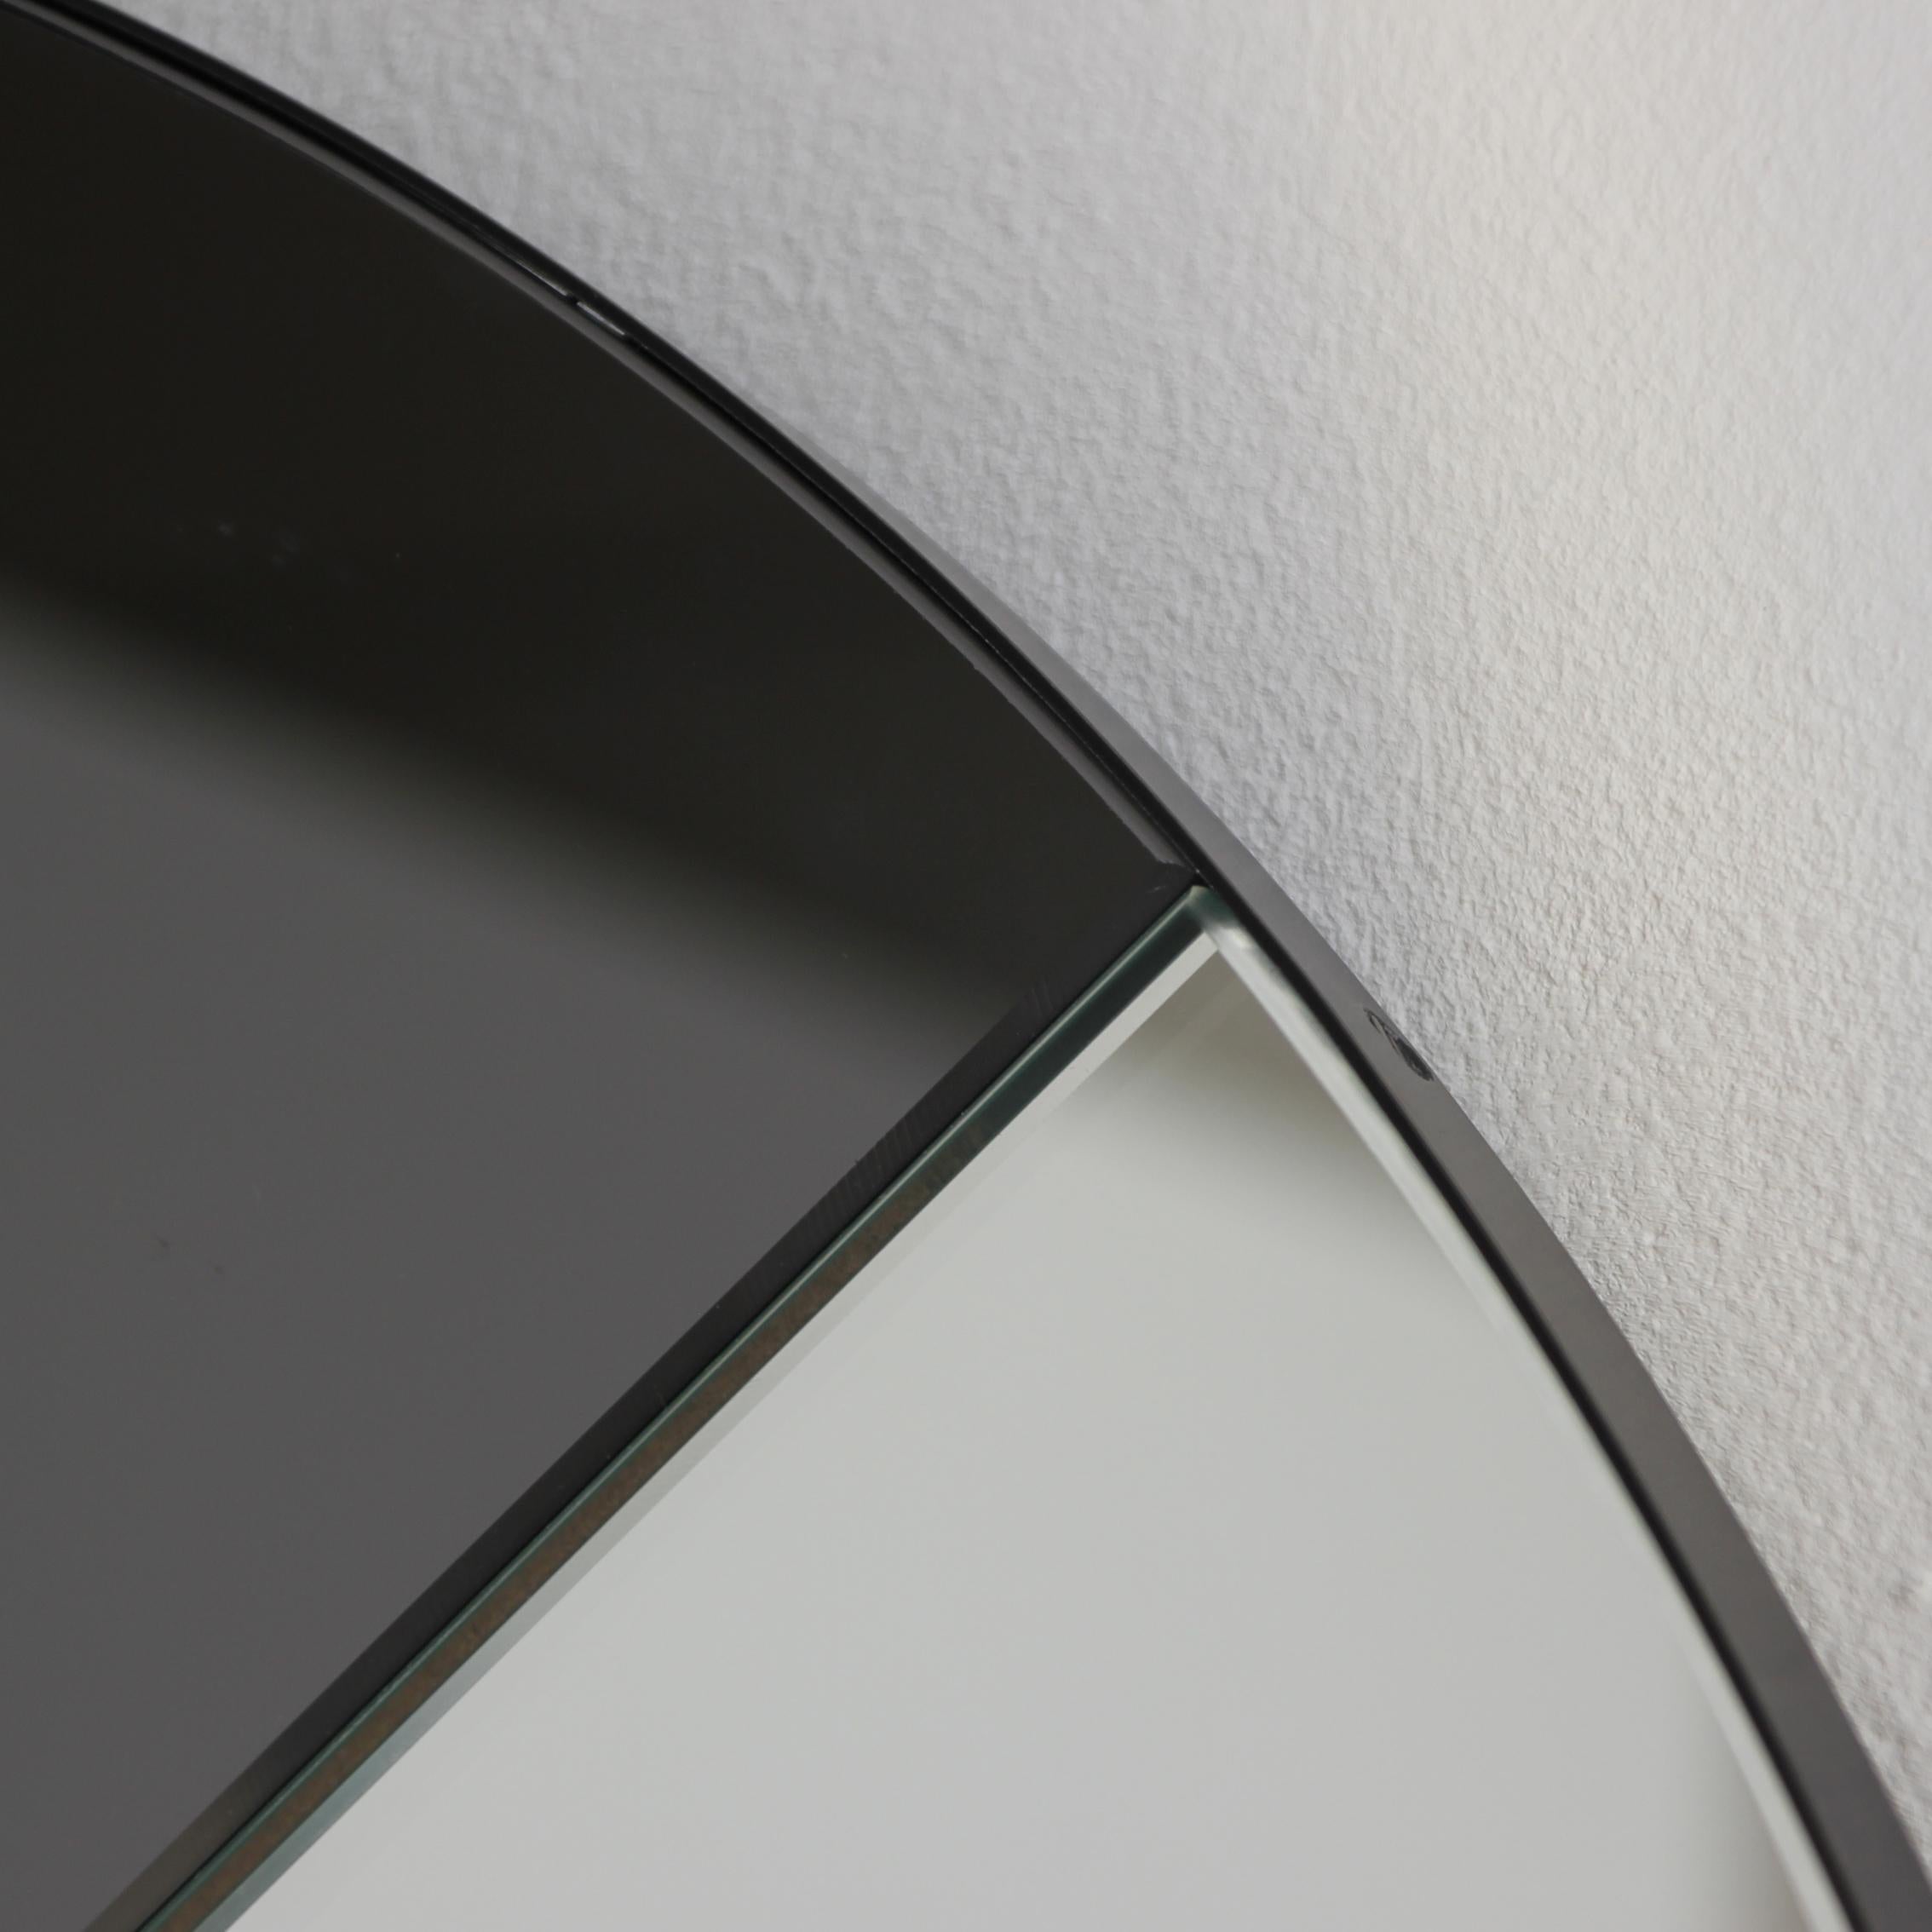 Orbis Dualis Mixed Tinted Silver Black Round Mirror with Black Frame, Regular In New Condition For Sale In London, GB